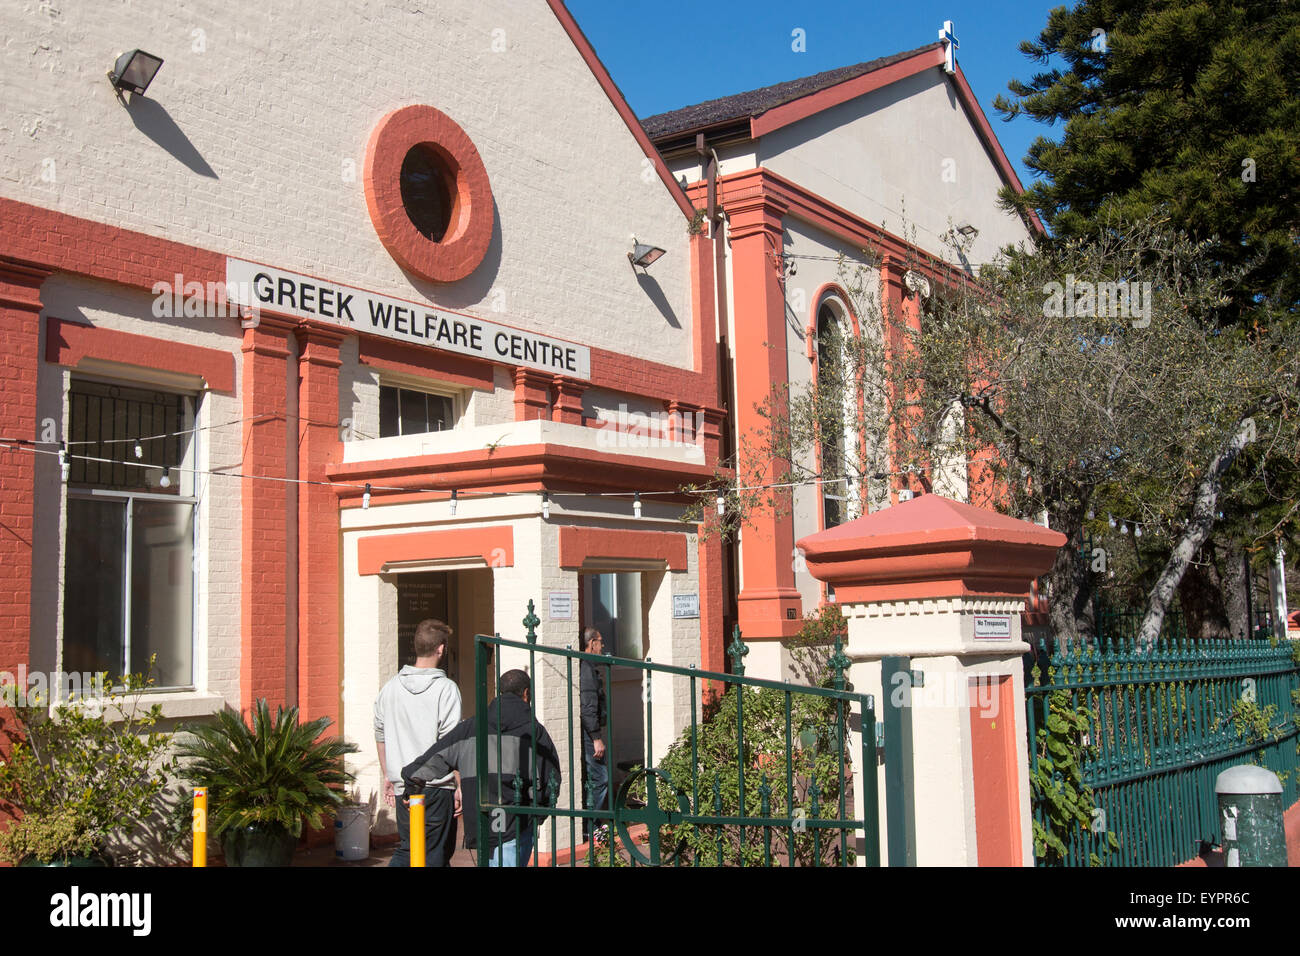 Greek welfare assistance centre in Newtown, inner suburb of Sydney,new south wales,australia Stock Photo